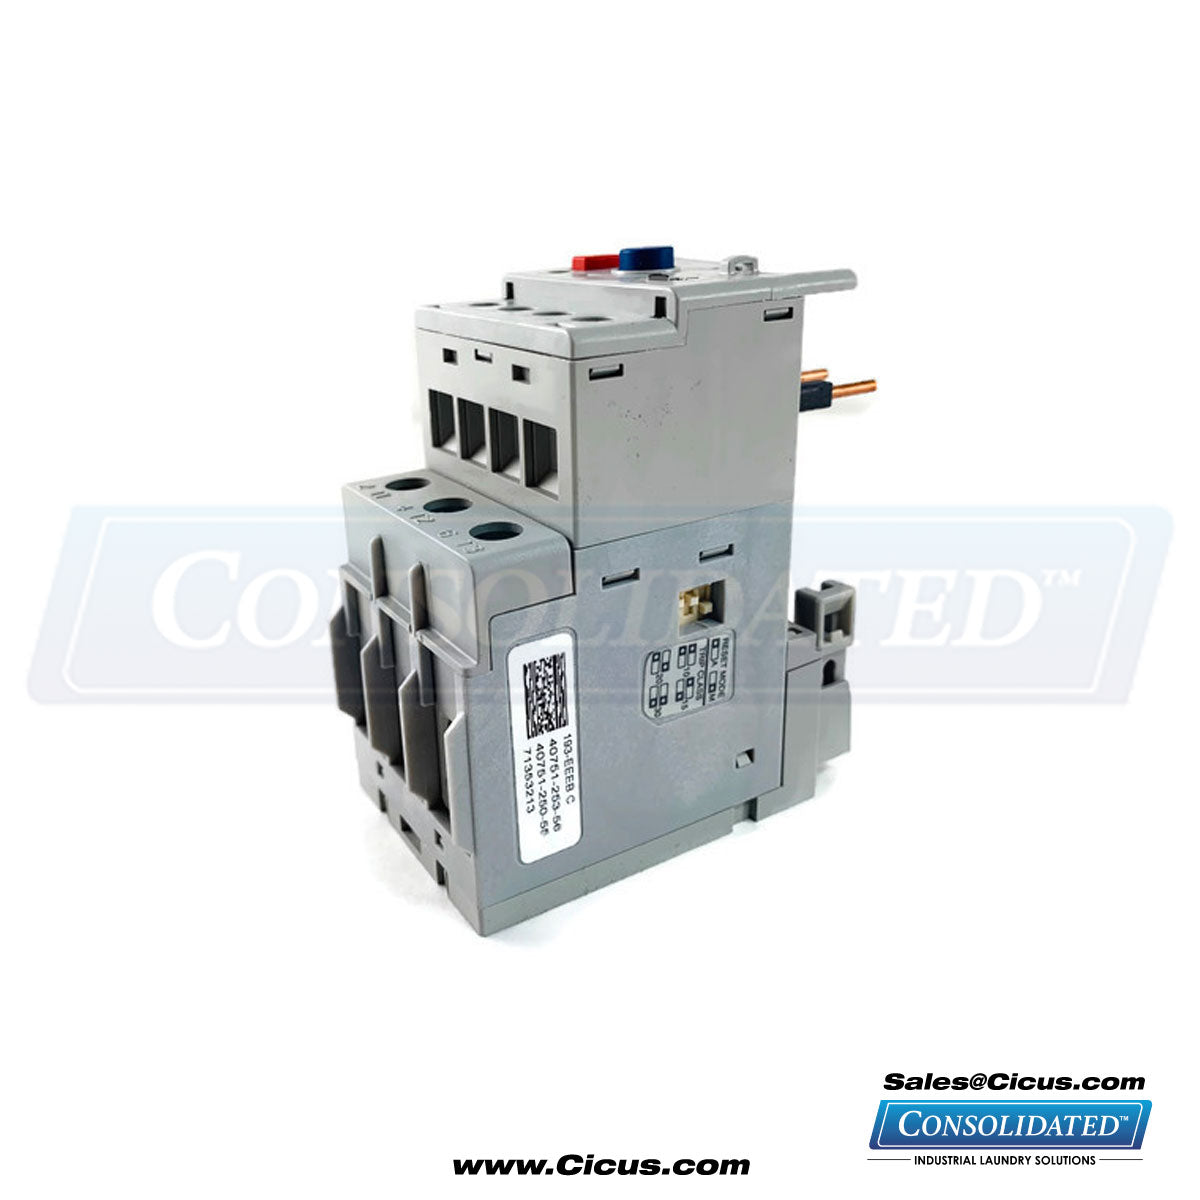 Alliance Laundry Systems Overload Relay, 5.4-27A (3 Phase) [AB193EEEB] - Front View